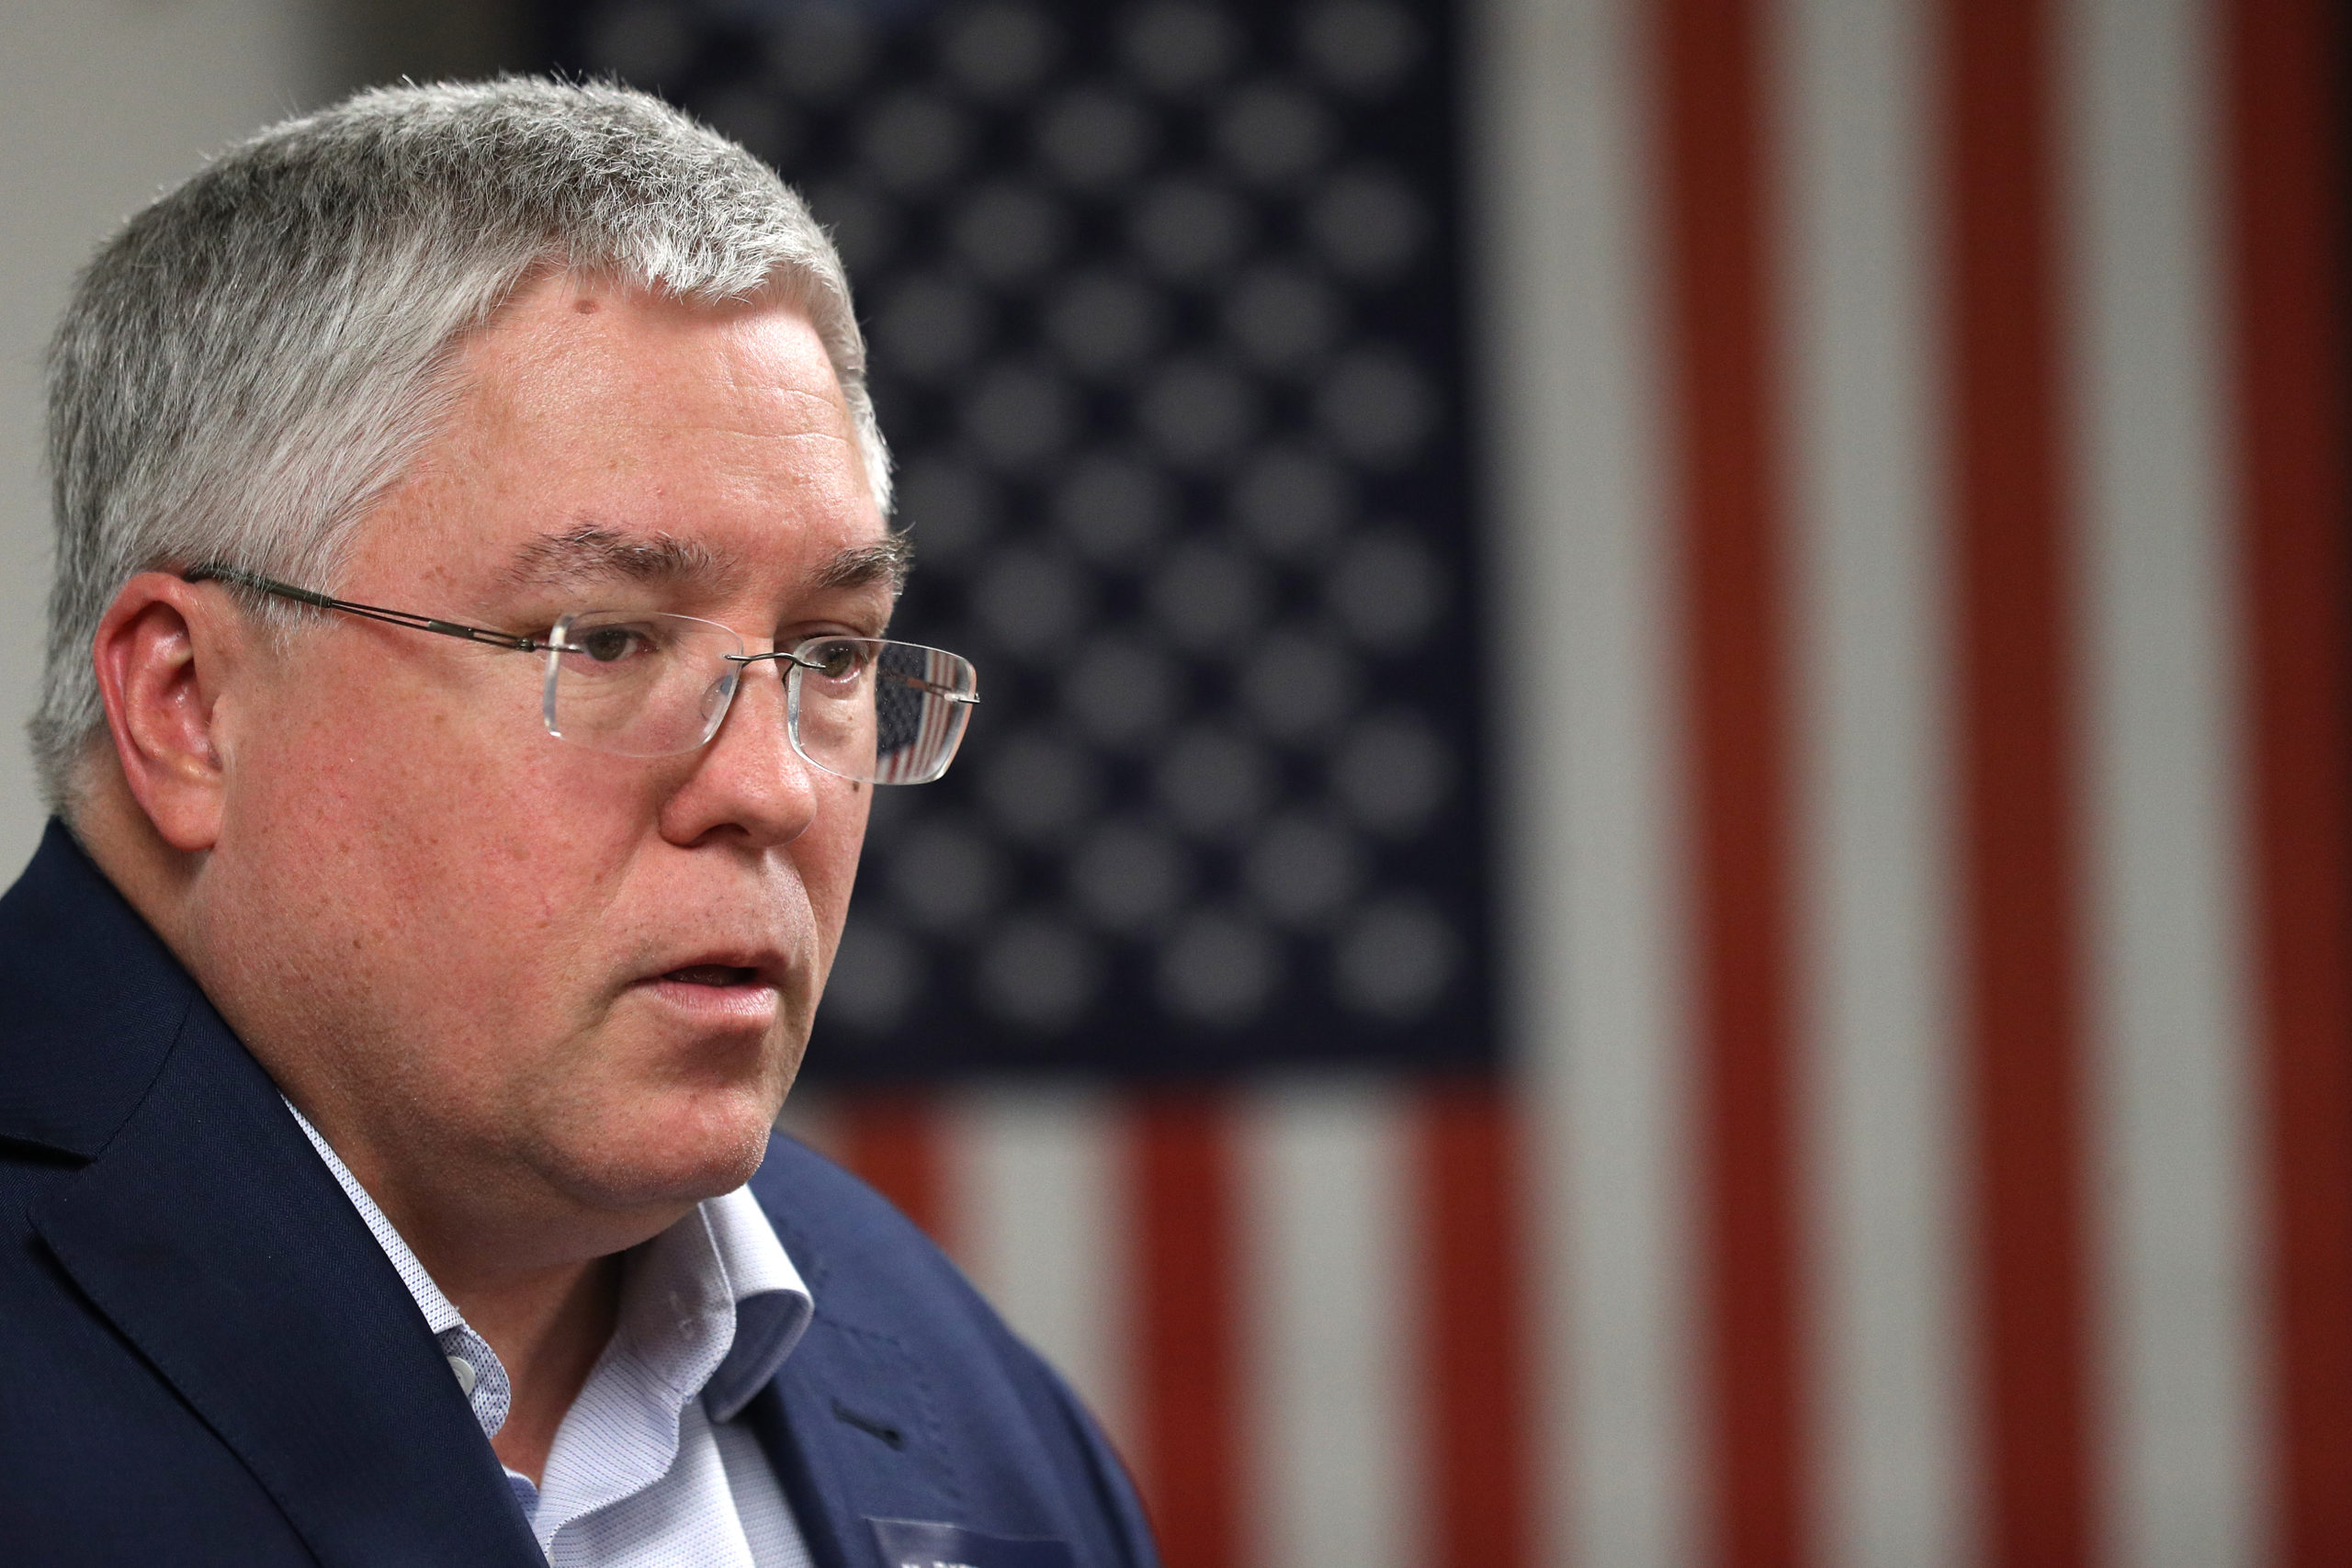 West Virginia Attorney General Patrick Morrisey pictured in Fairmount, West Virginia in 2018. (Patrick Smith/Getty Images)